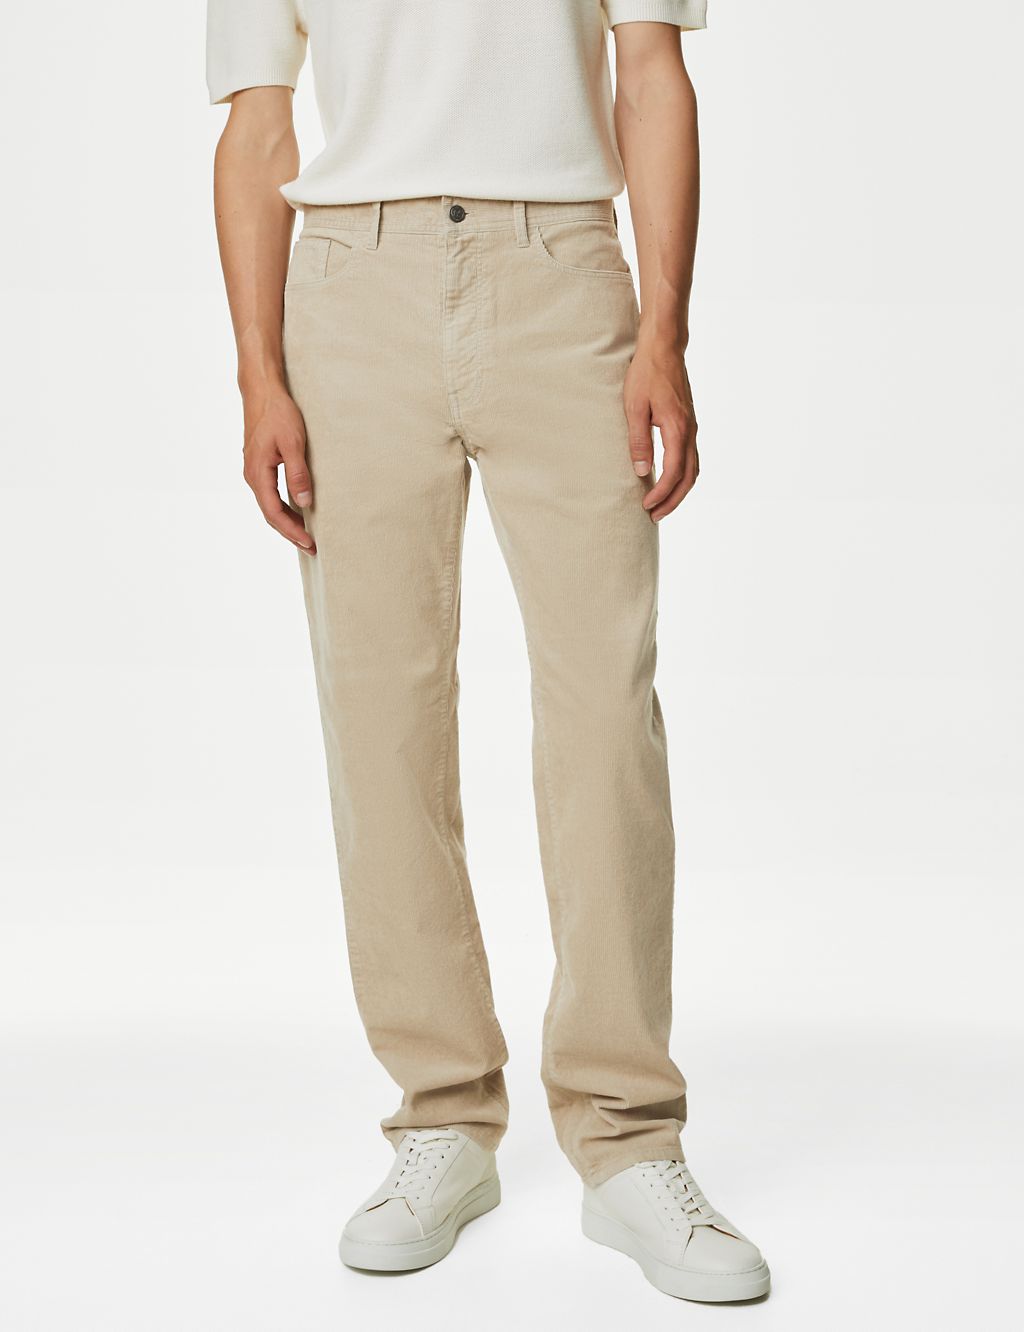 Straight Fit Corduroy 5 Pocket Trousers | M&S Collection | M&S